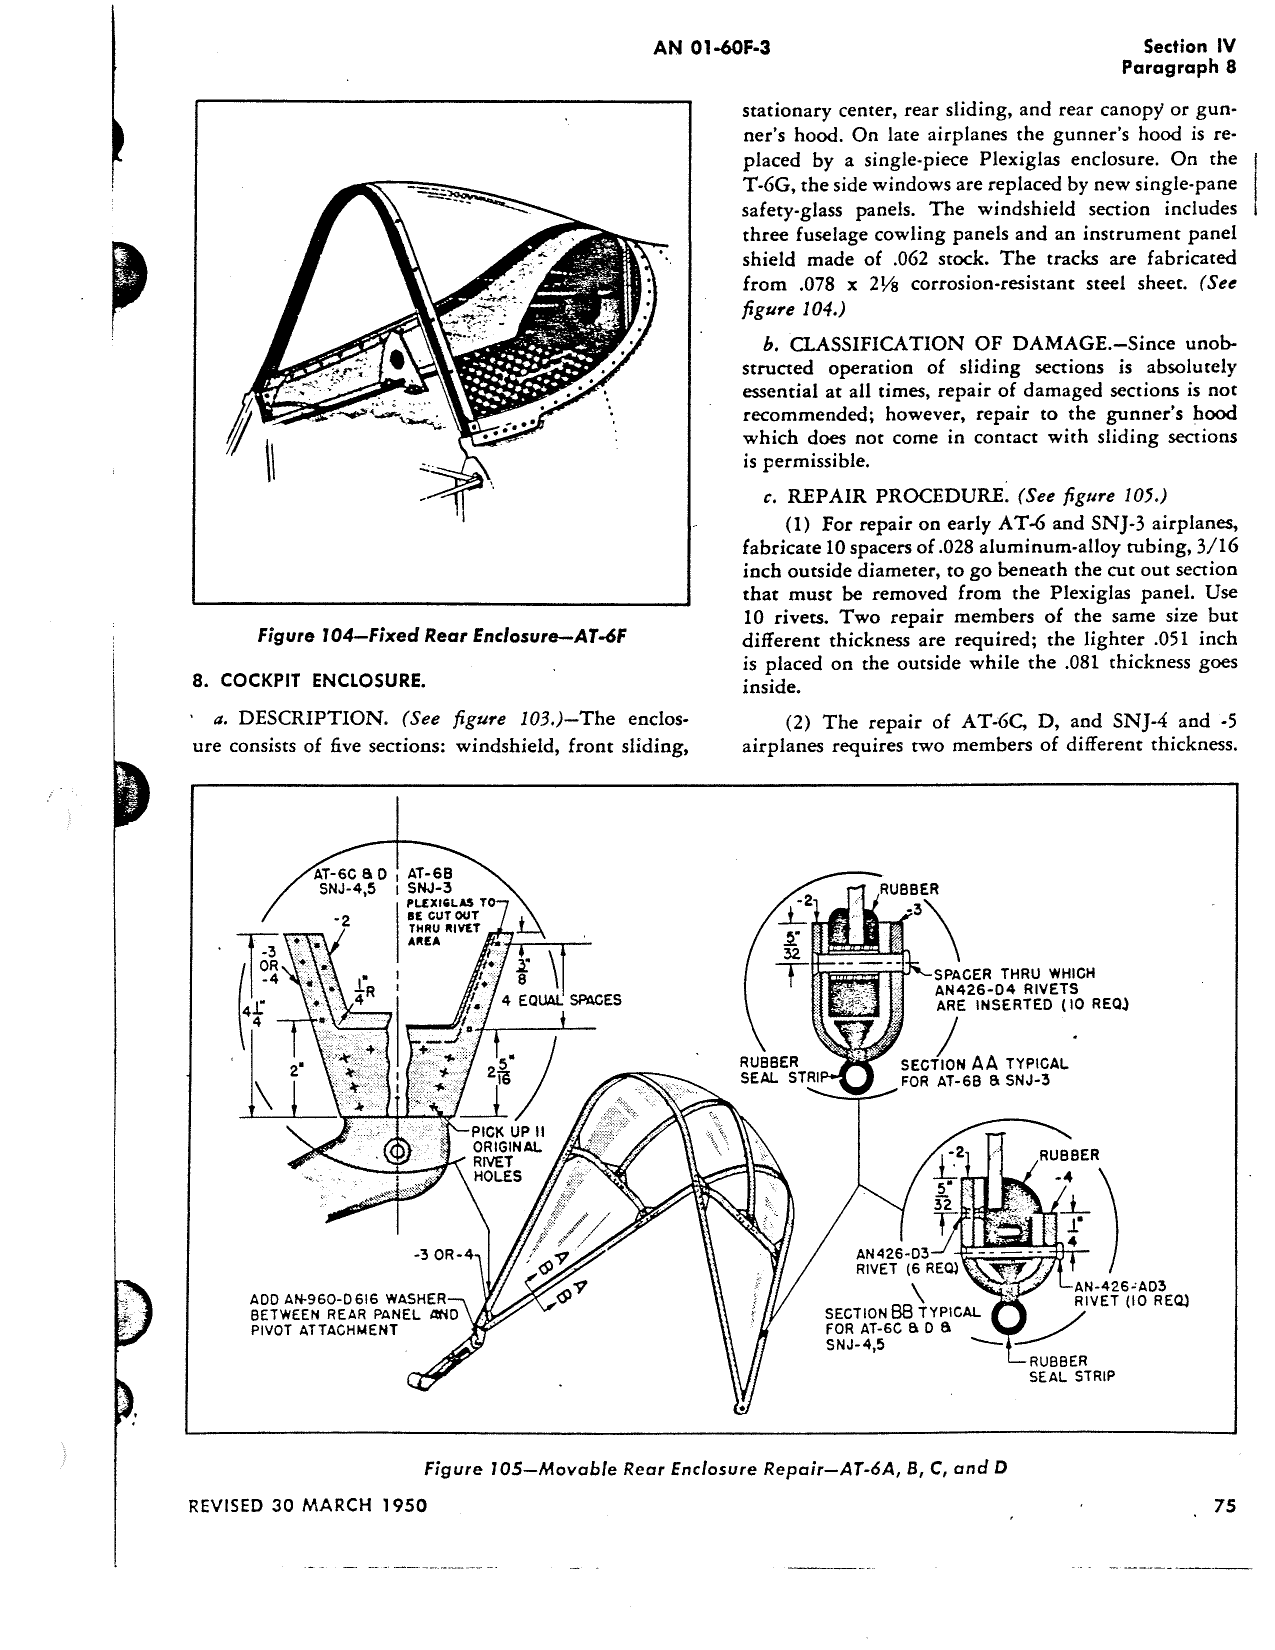 Sample page 83 from AirCorps Library document: Structural Repair Instructions - T-6, SNJ-3, SNJ-4, SNJ-5